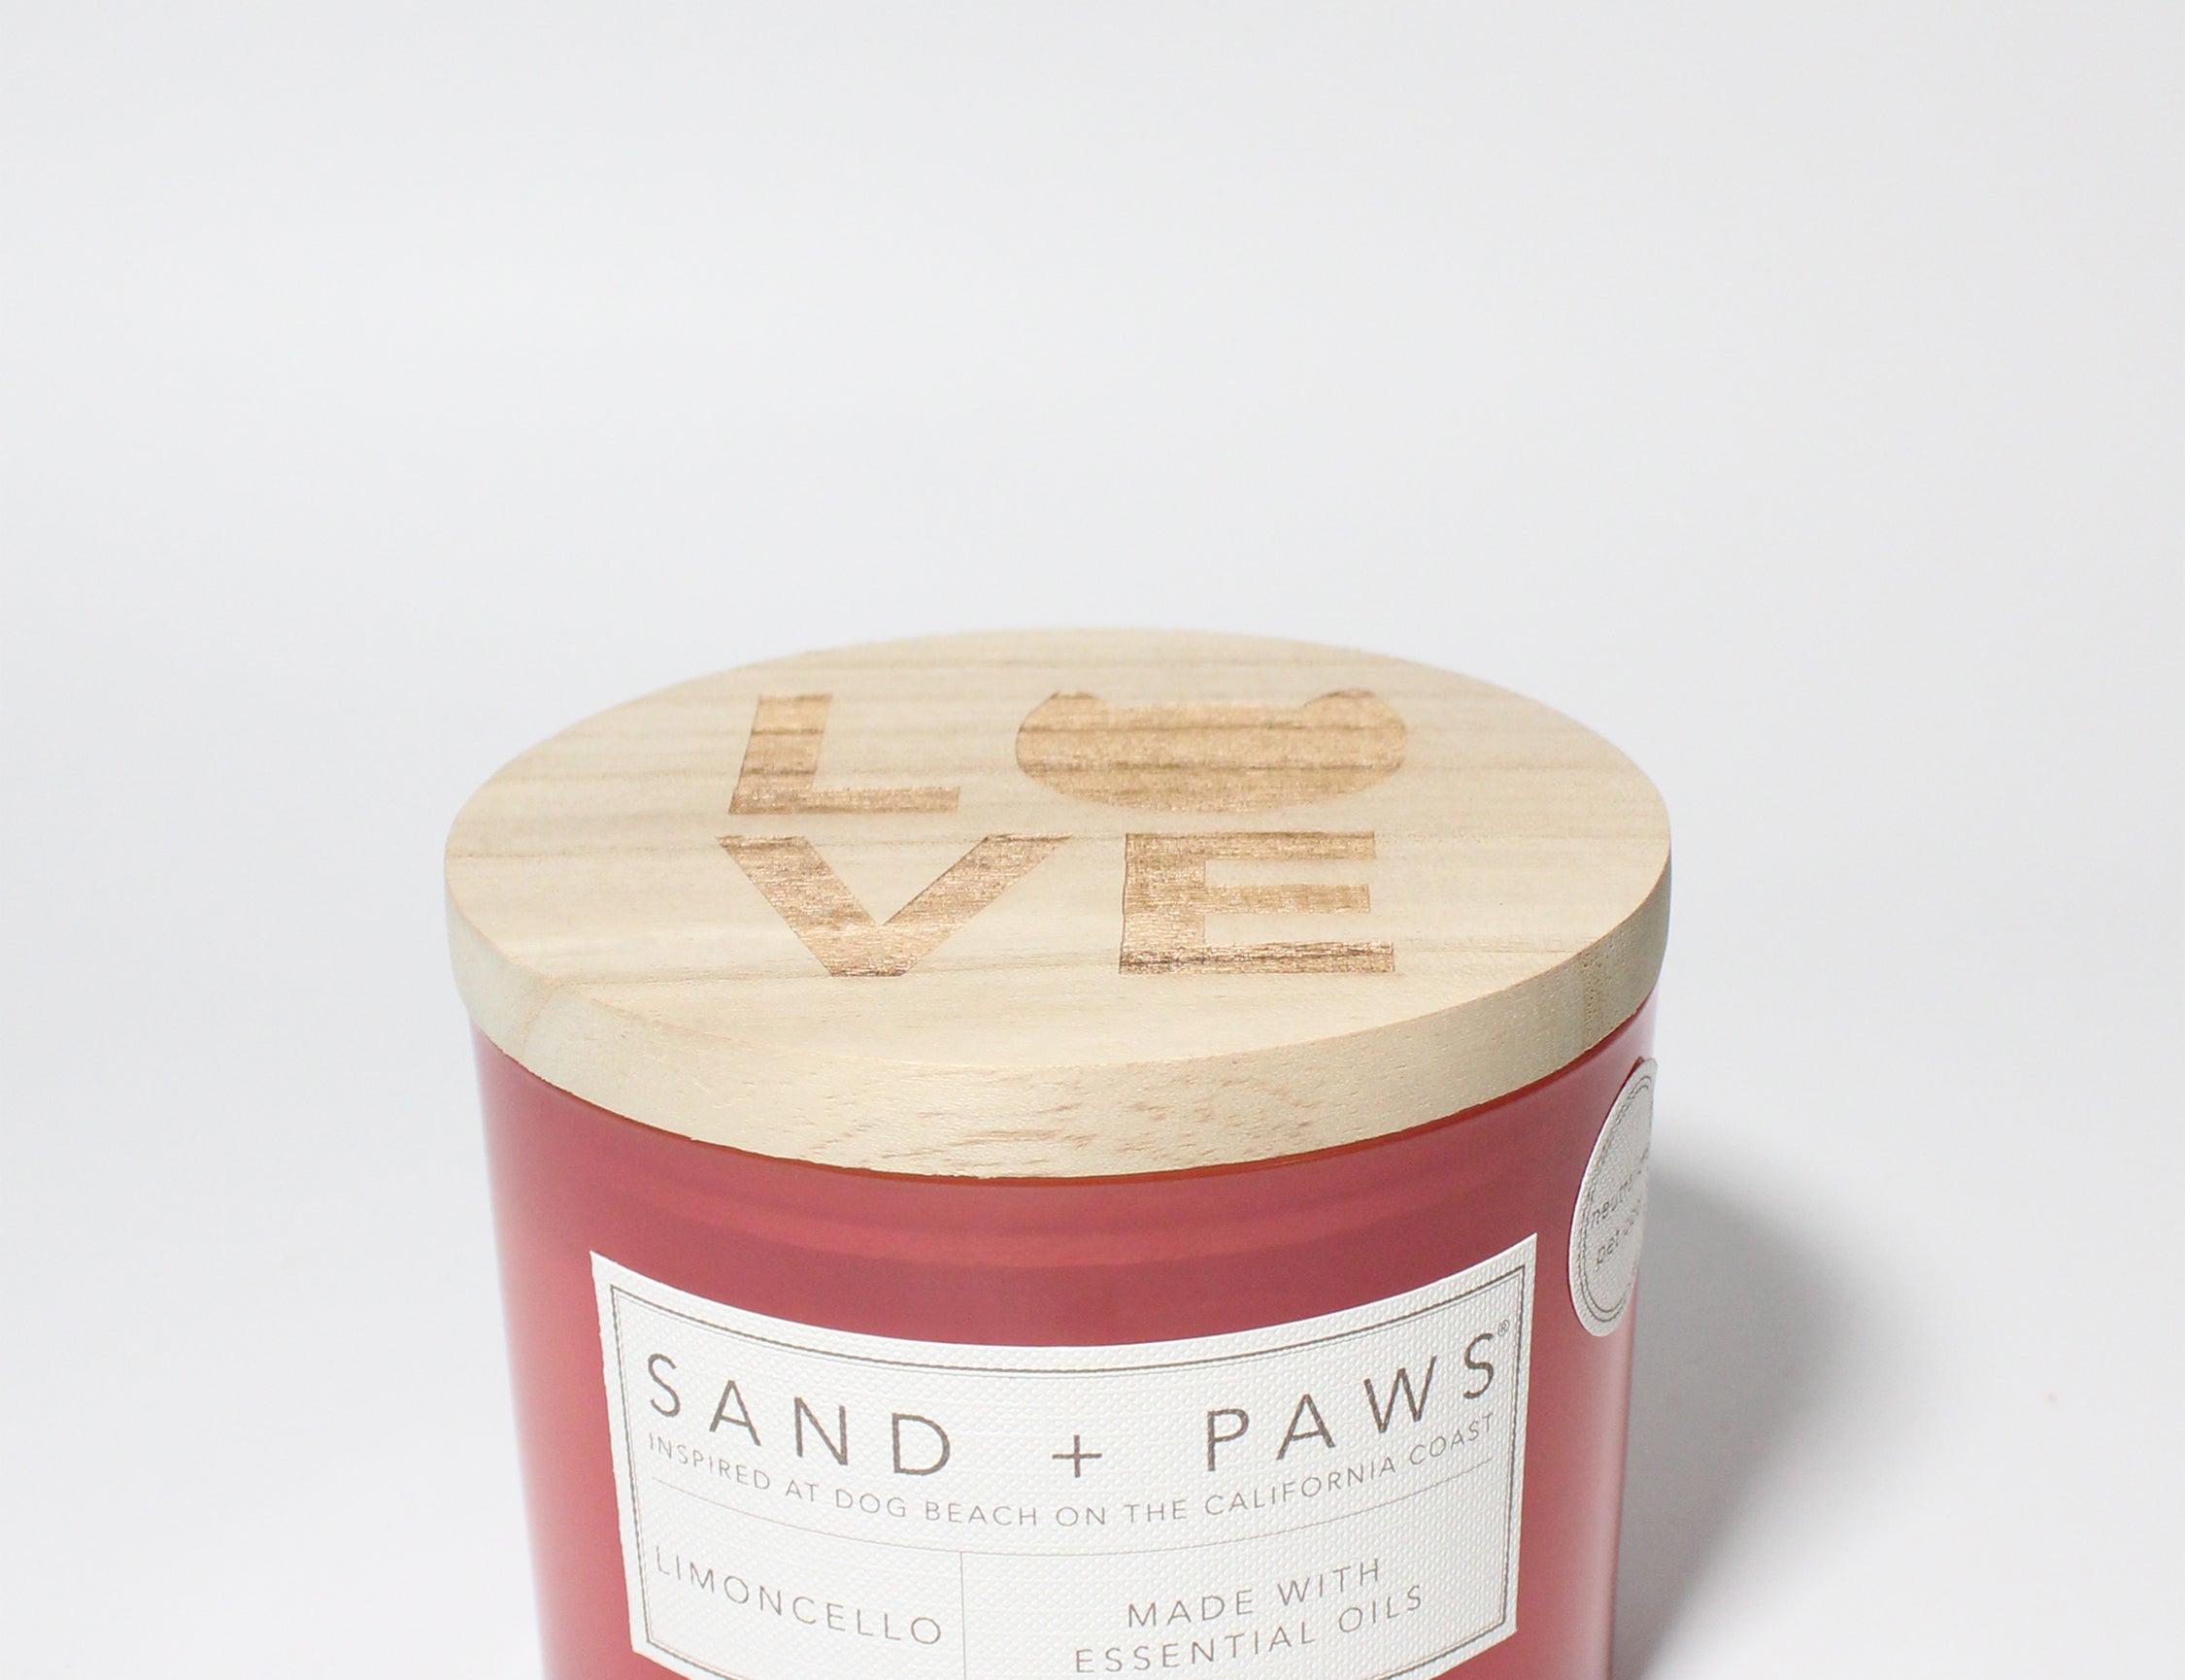 Sand + Paws Limoncello 12 oz scented candle Hibiscus vessel with (Cat) Love carved lid